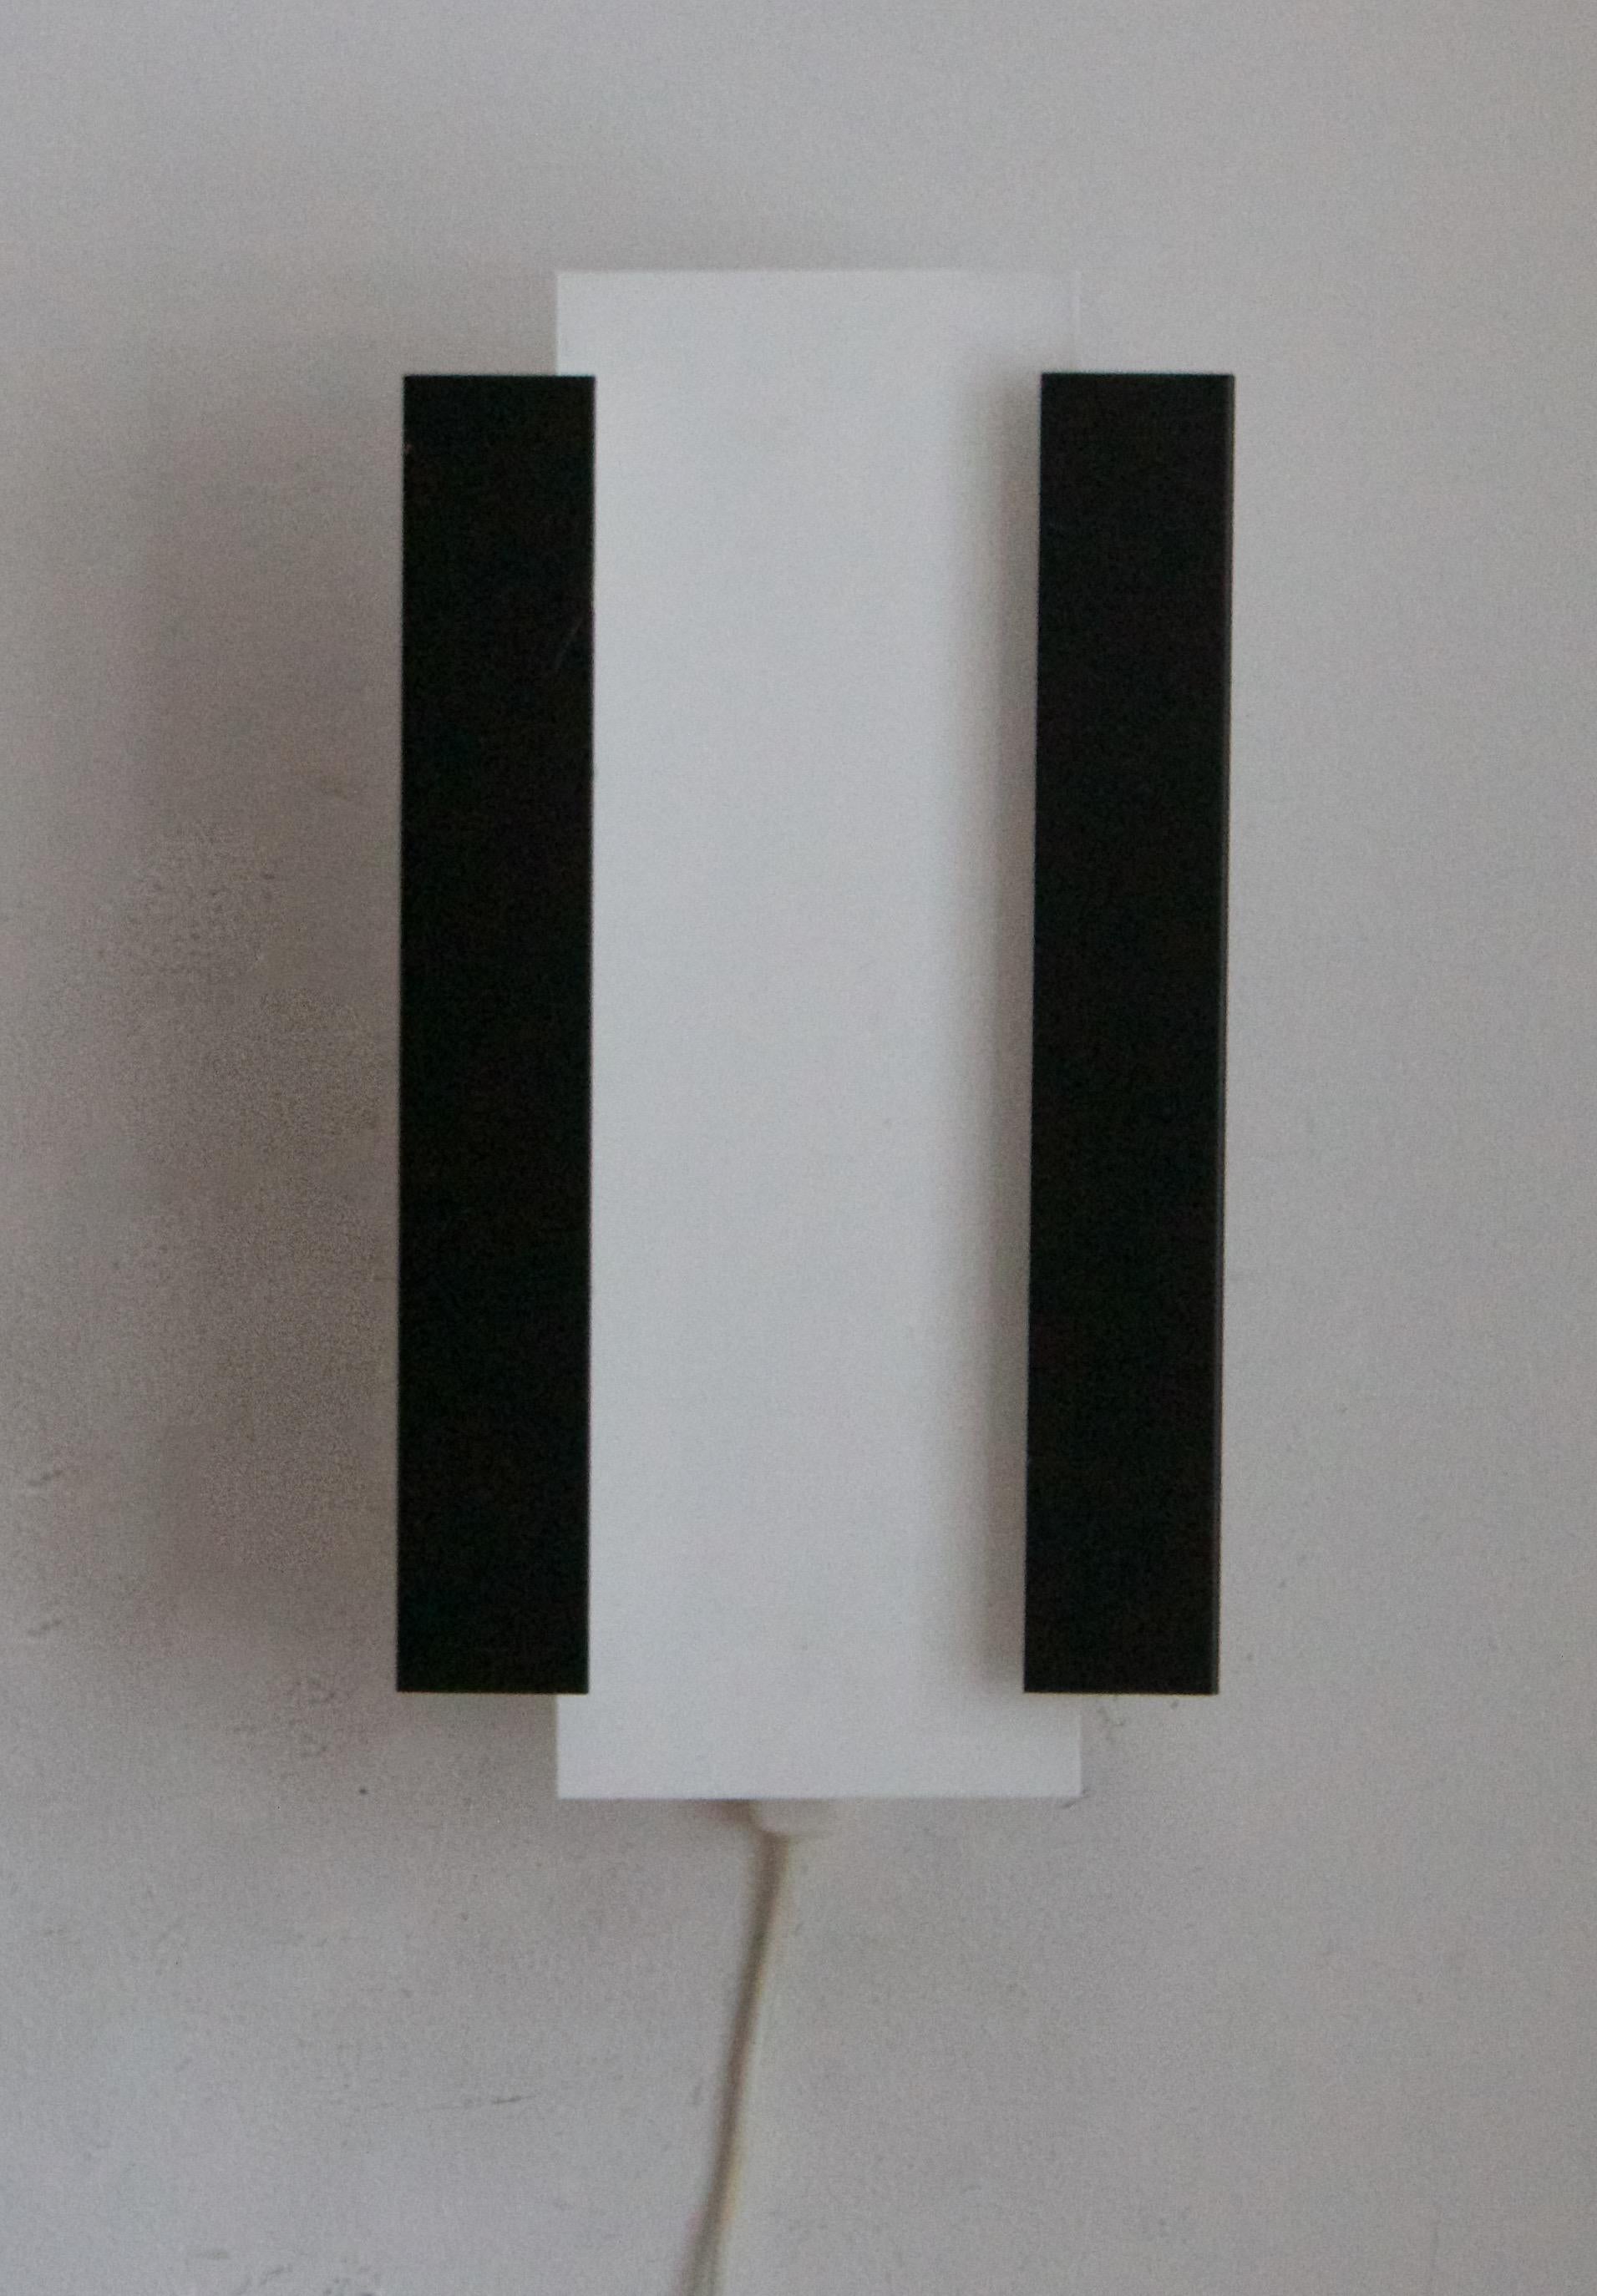 Scandinavian Modern Itsu, Minimalist Wall Light, Black and White Lacquered Metal, Finland, 1950s For Sale